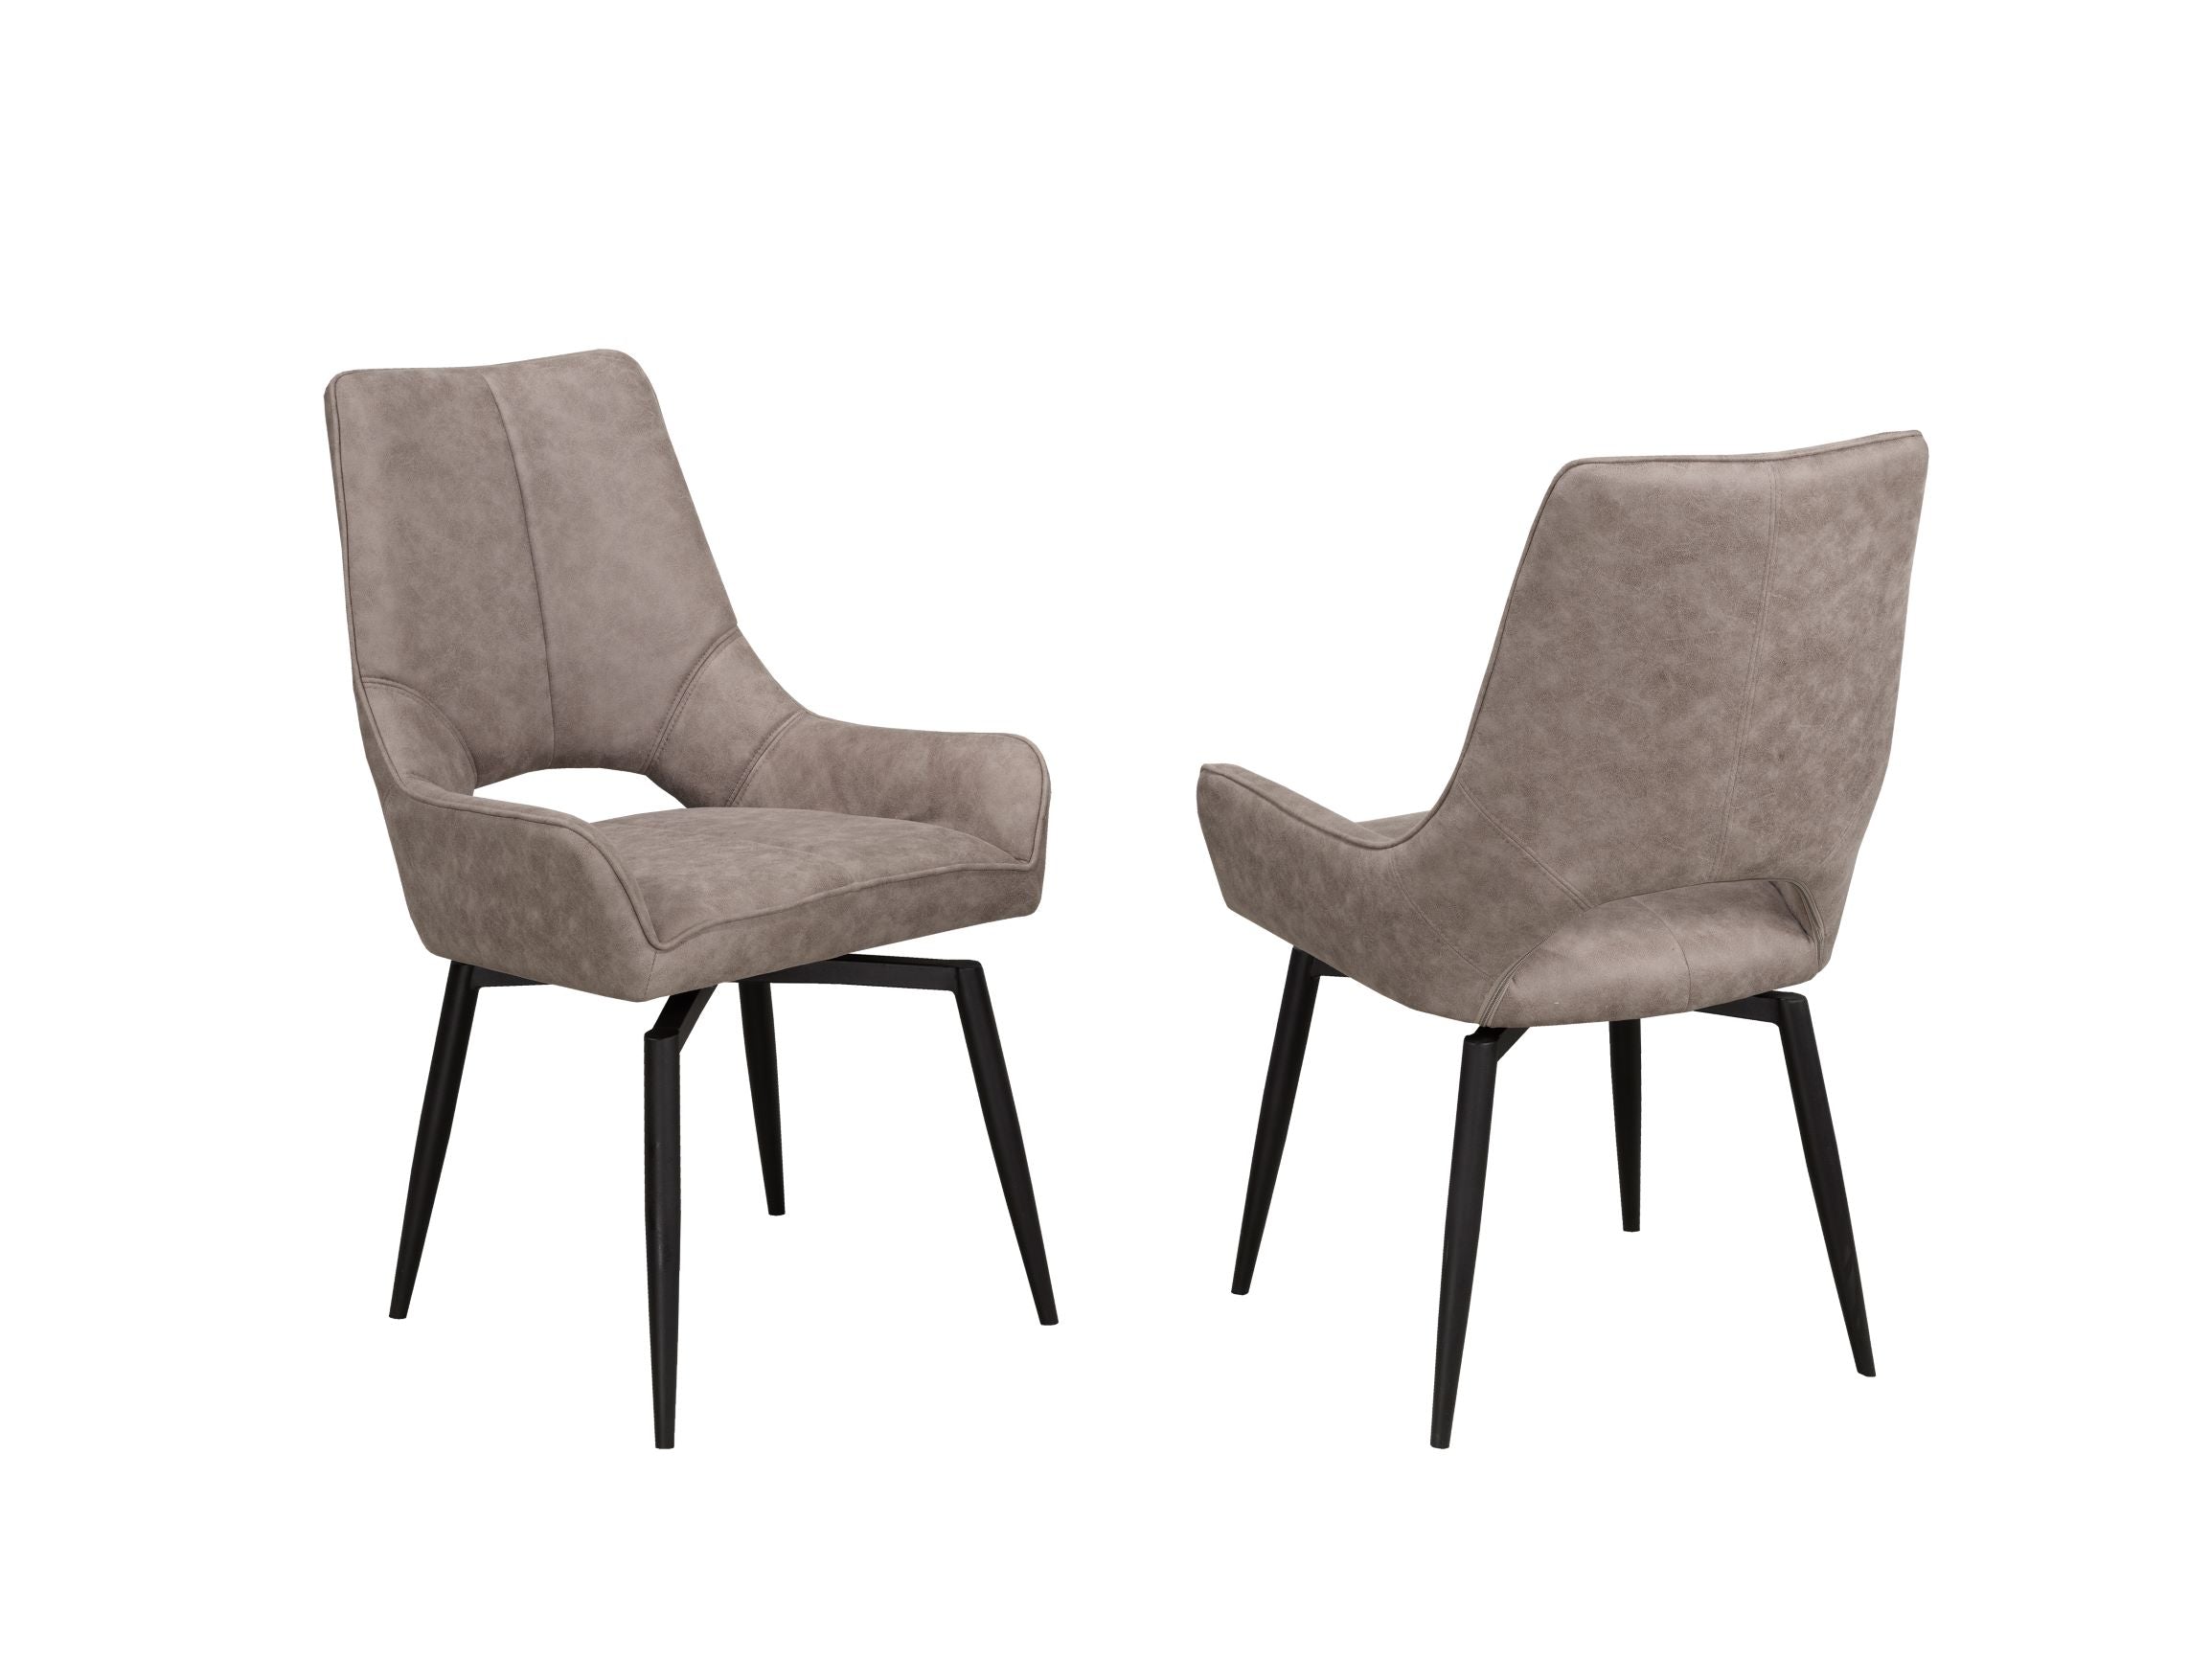 Electra Swivel Dining Chair C-1315Y-1 (Set of 2)